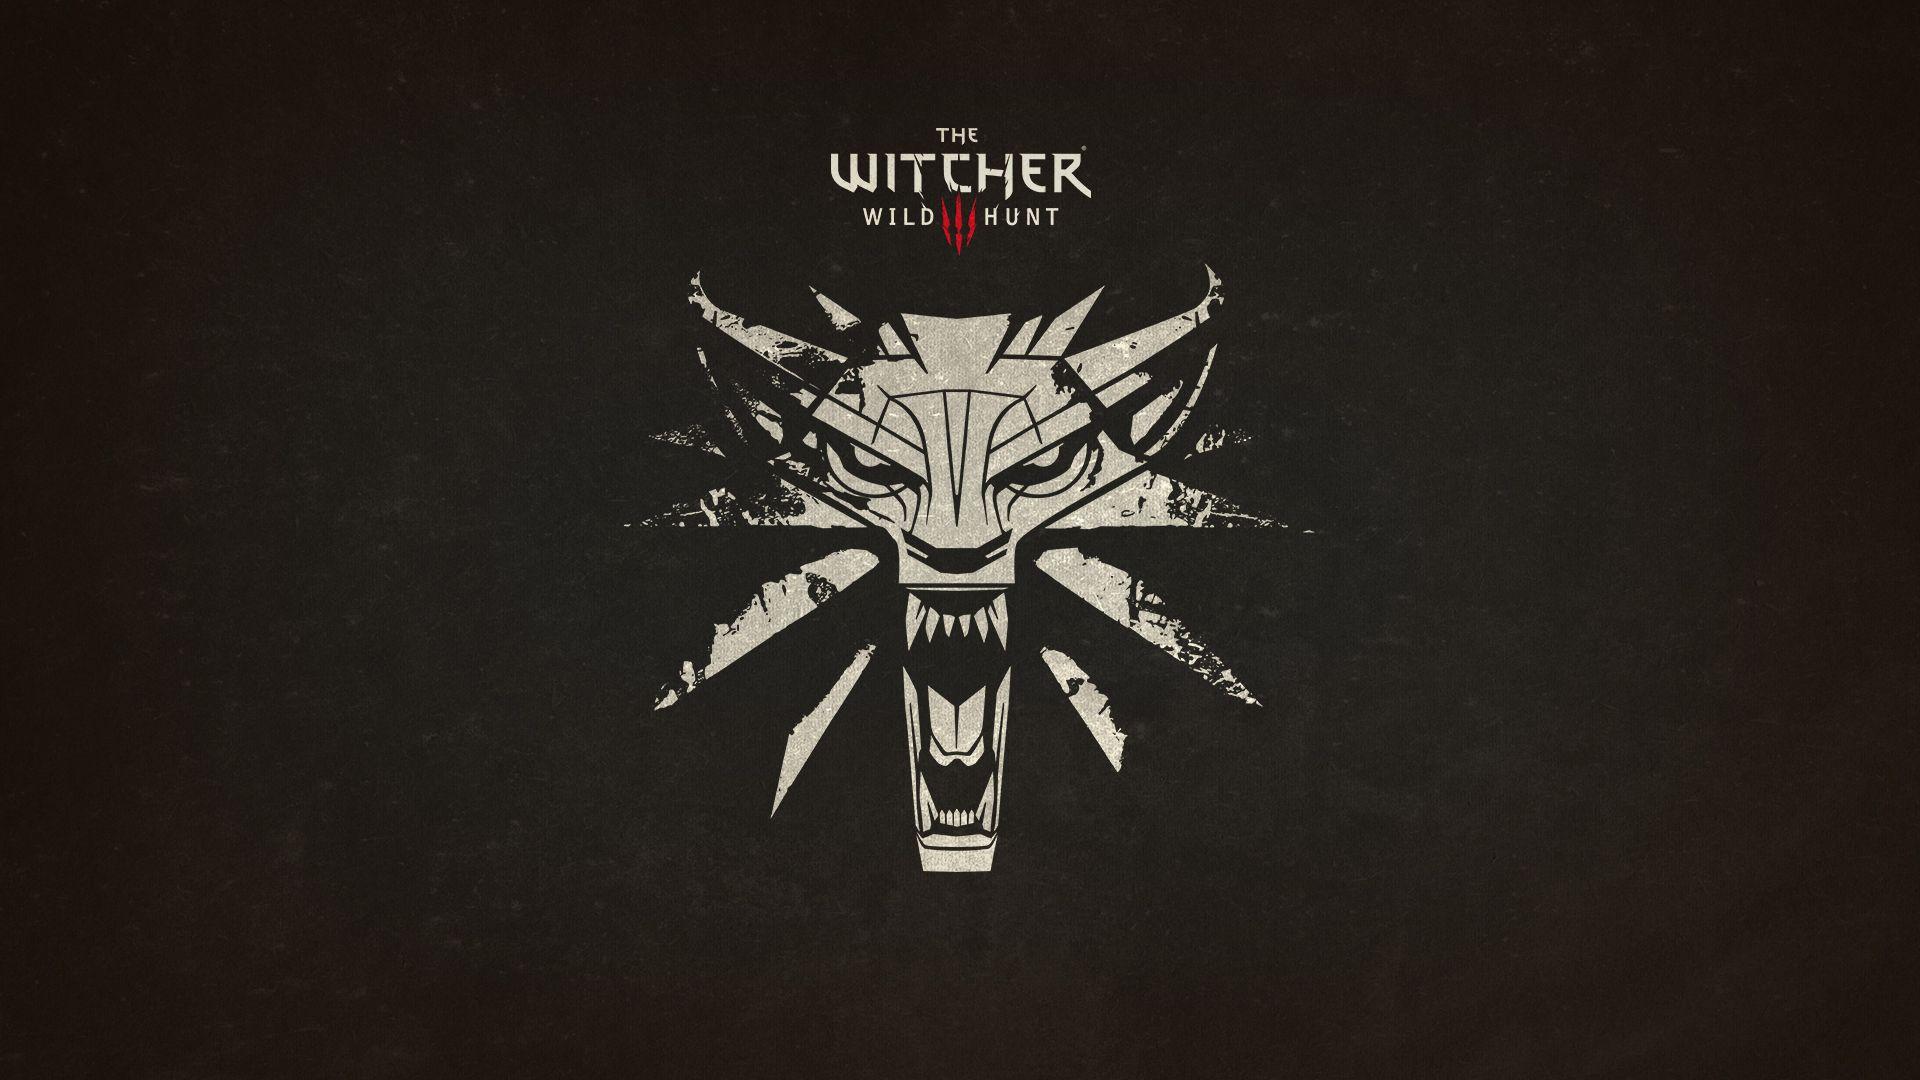 The Witcher 3 wallpaper